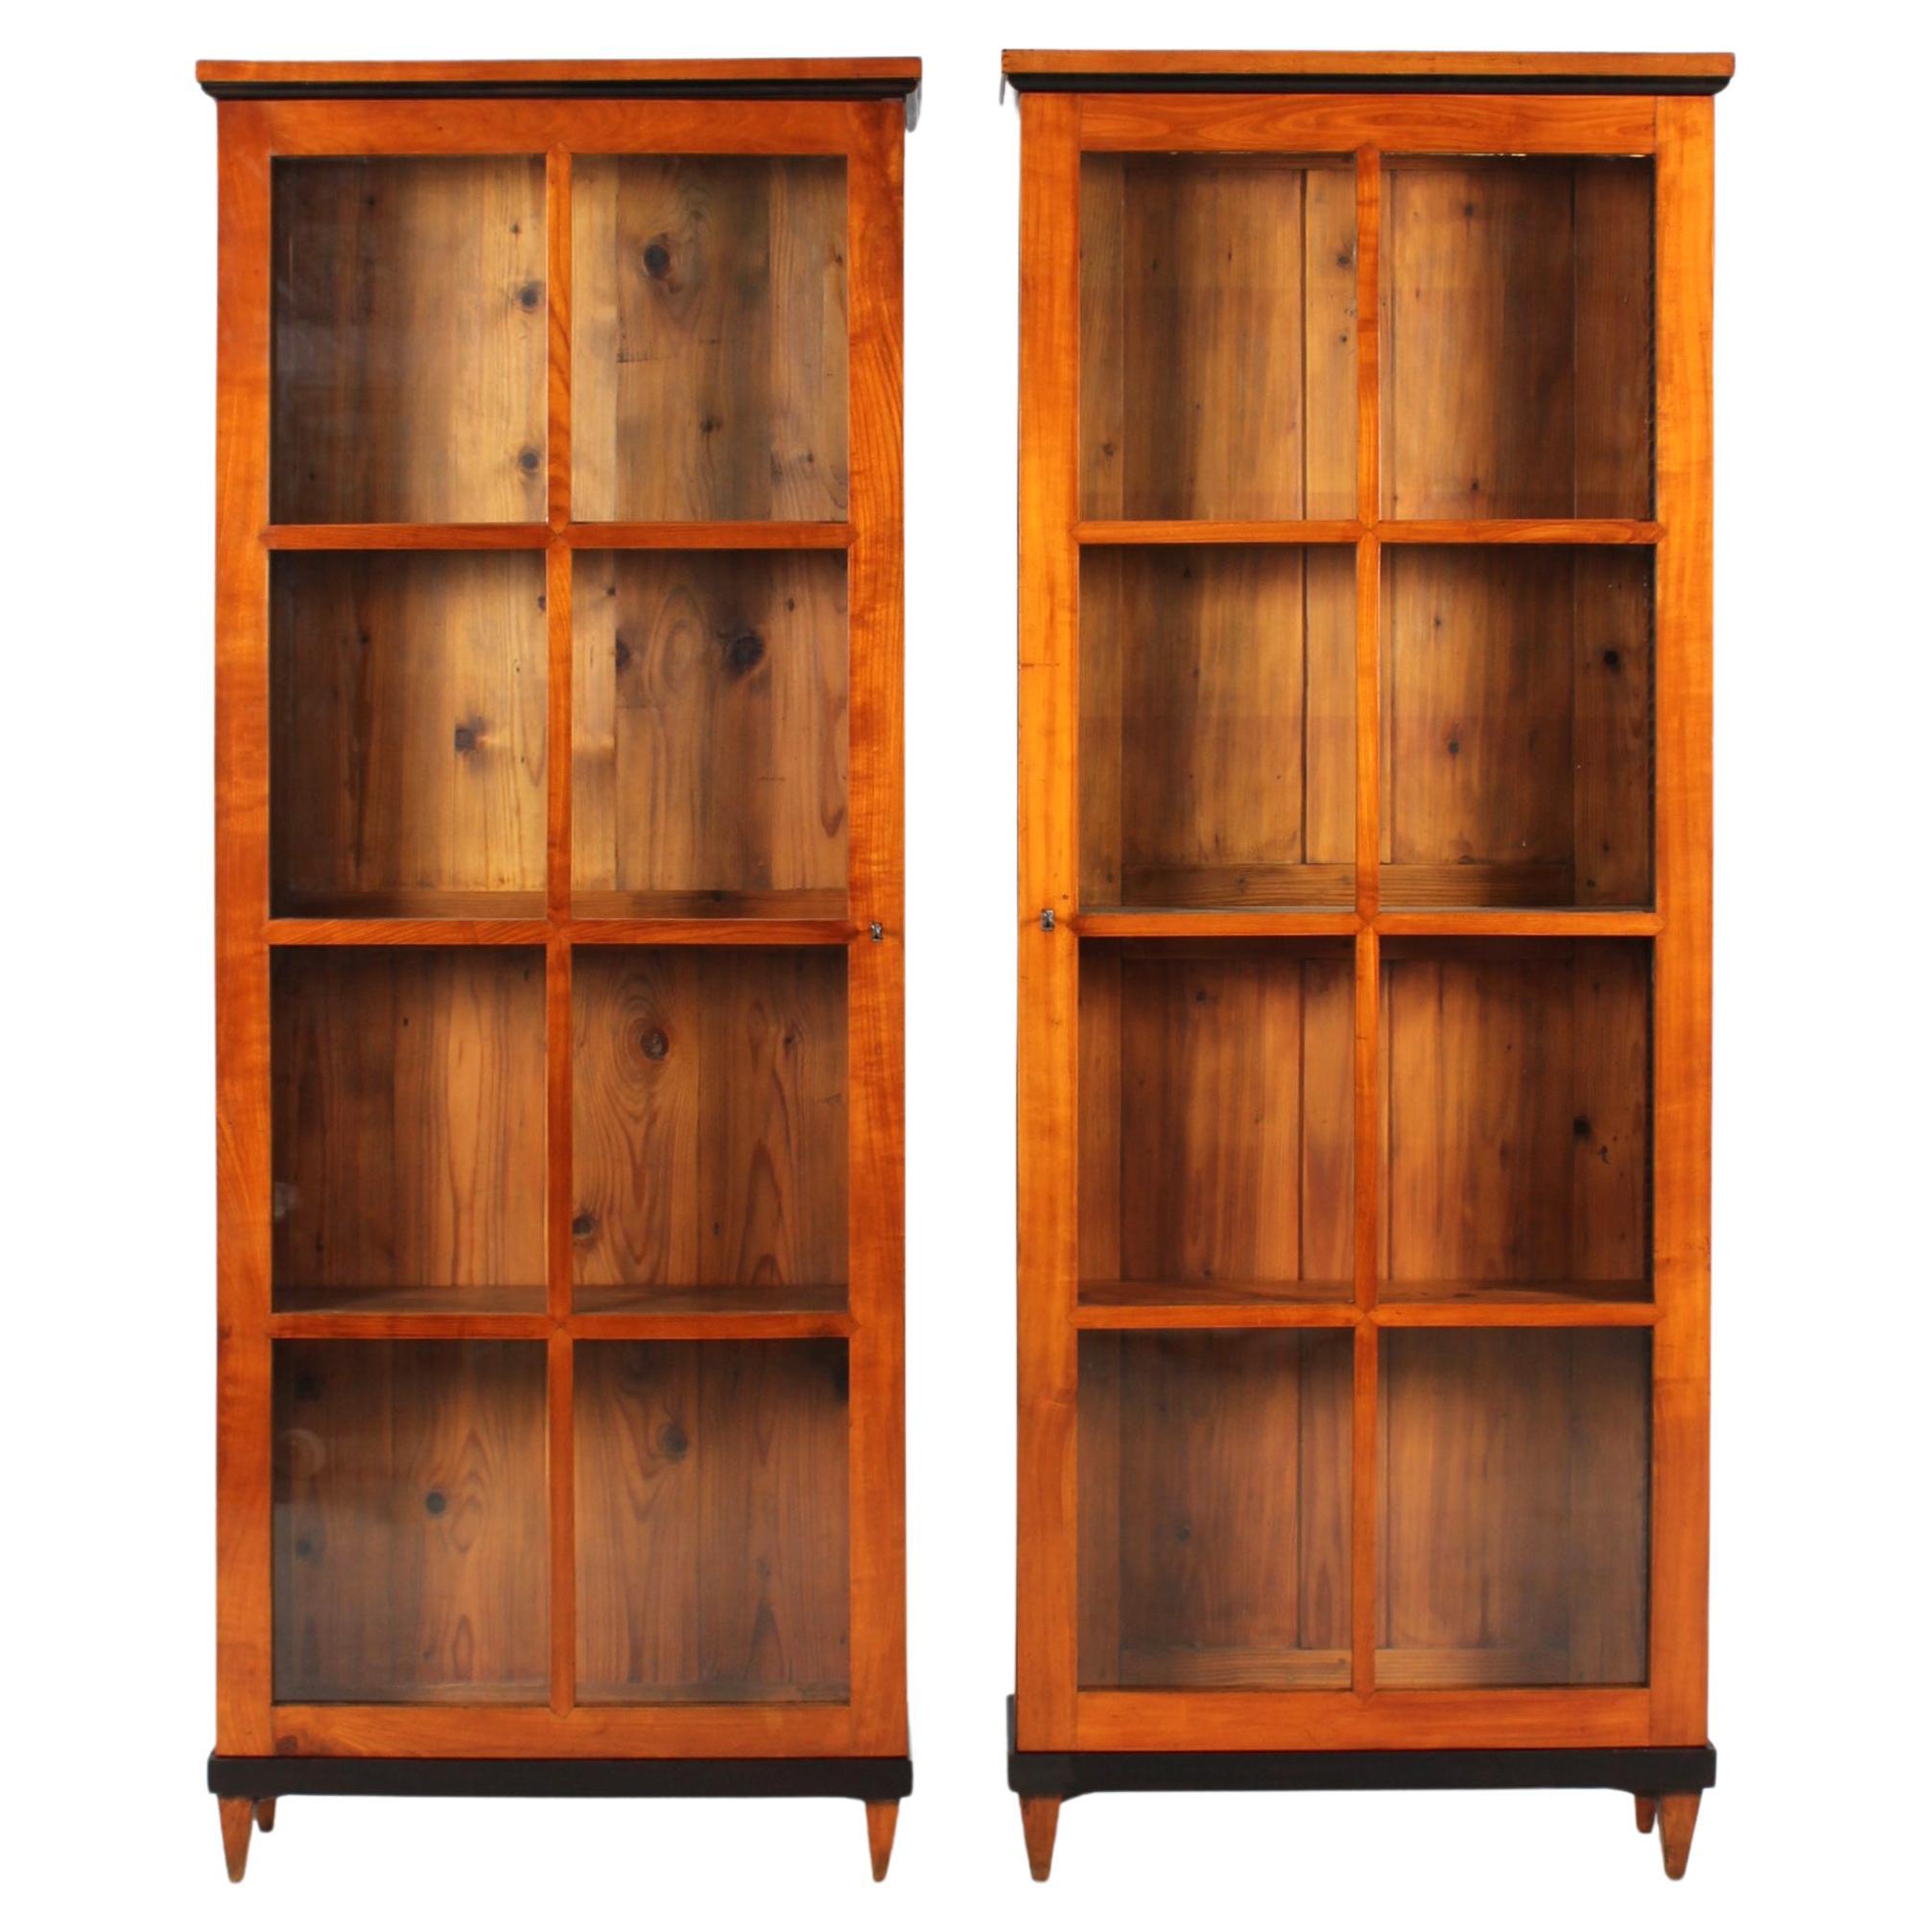 Pair Of Two Matching Biedermeier Bookcases, Cherrywood, Southern Germany, c 1820